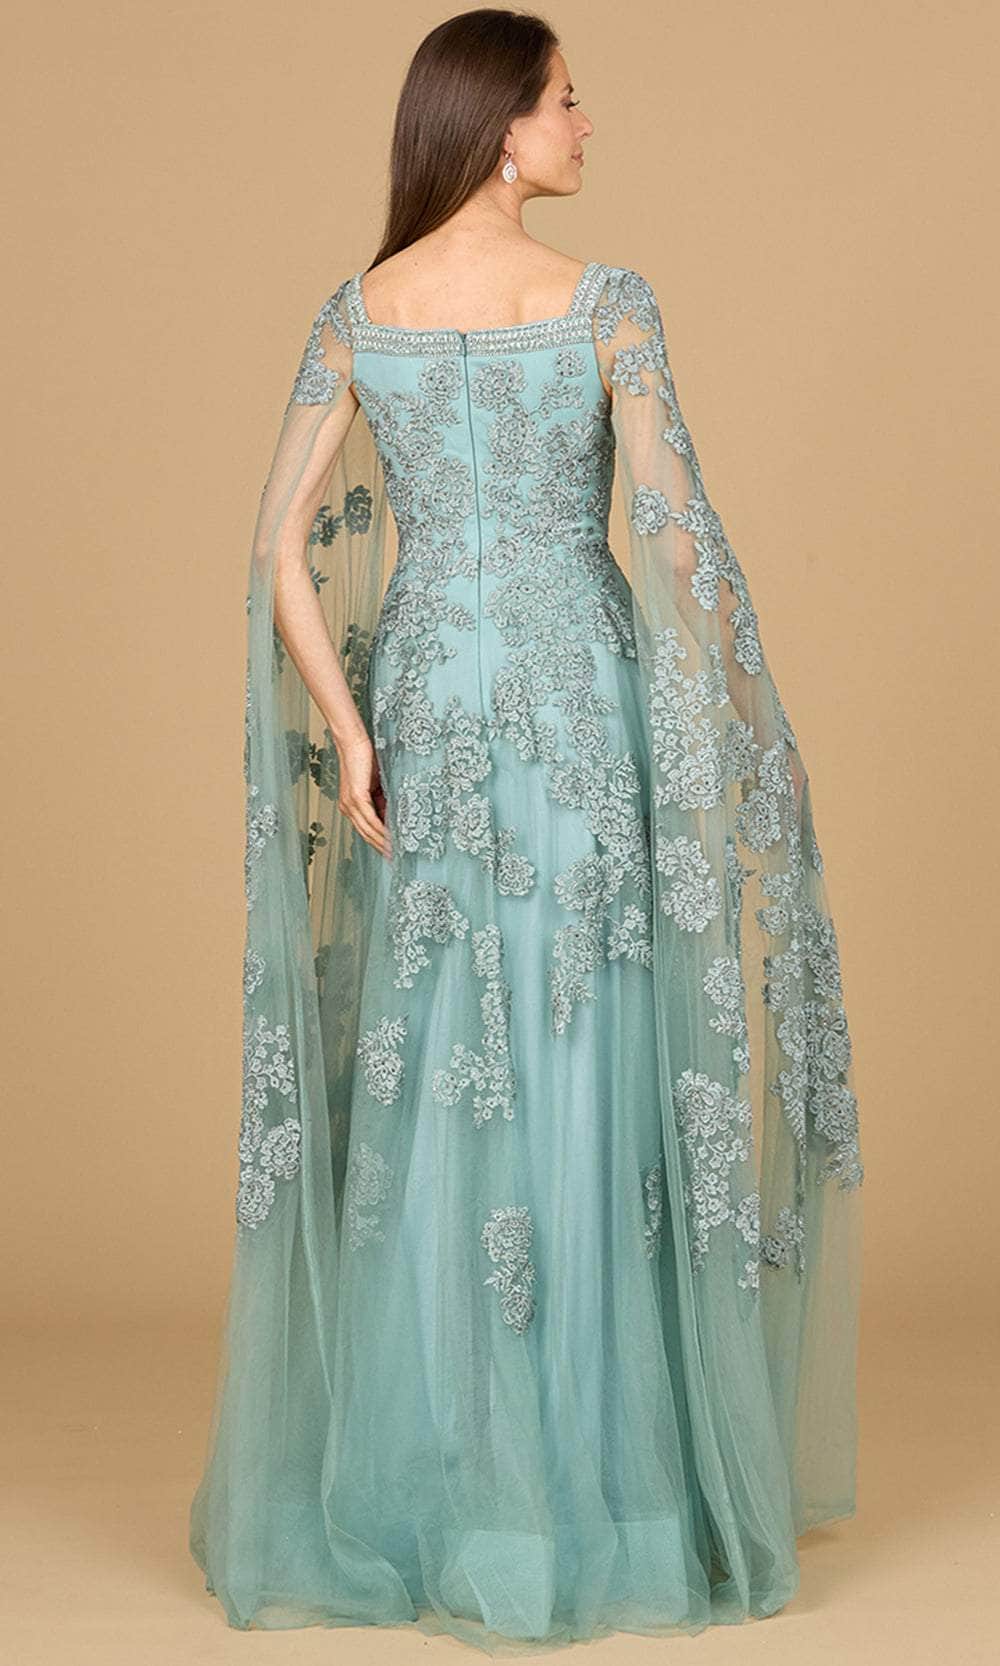 Lara Dresses 29138 - Lace Cape Sleeve Evening Gown